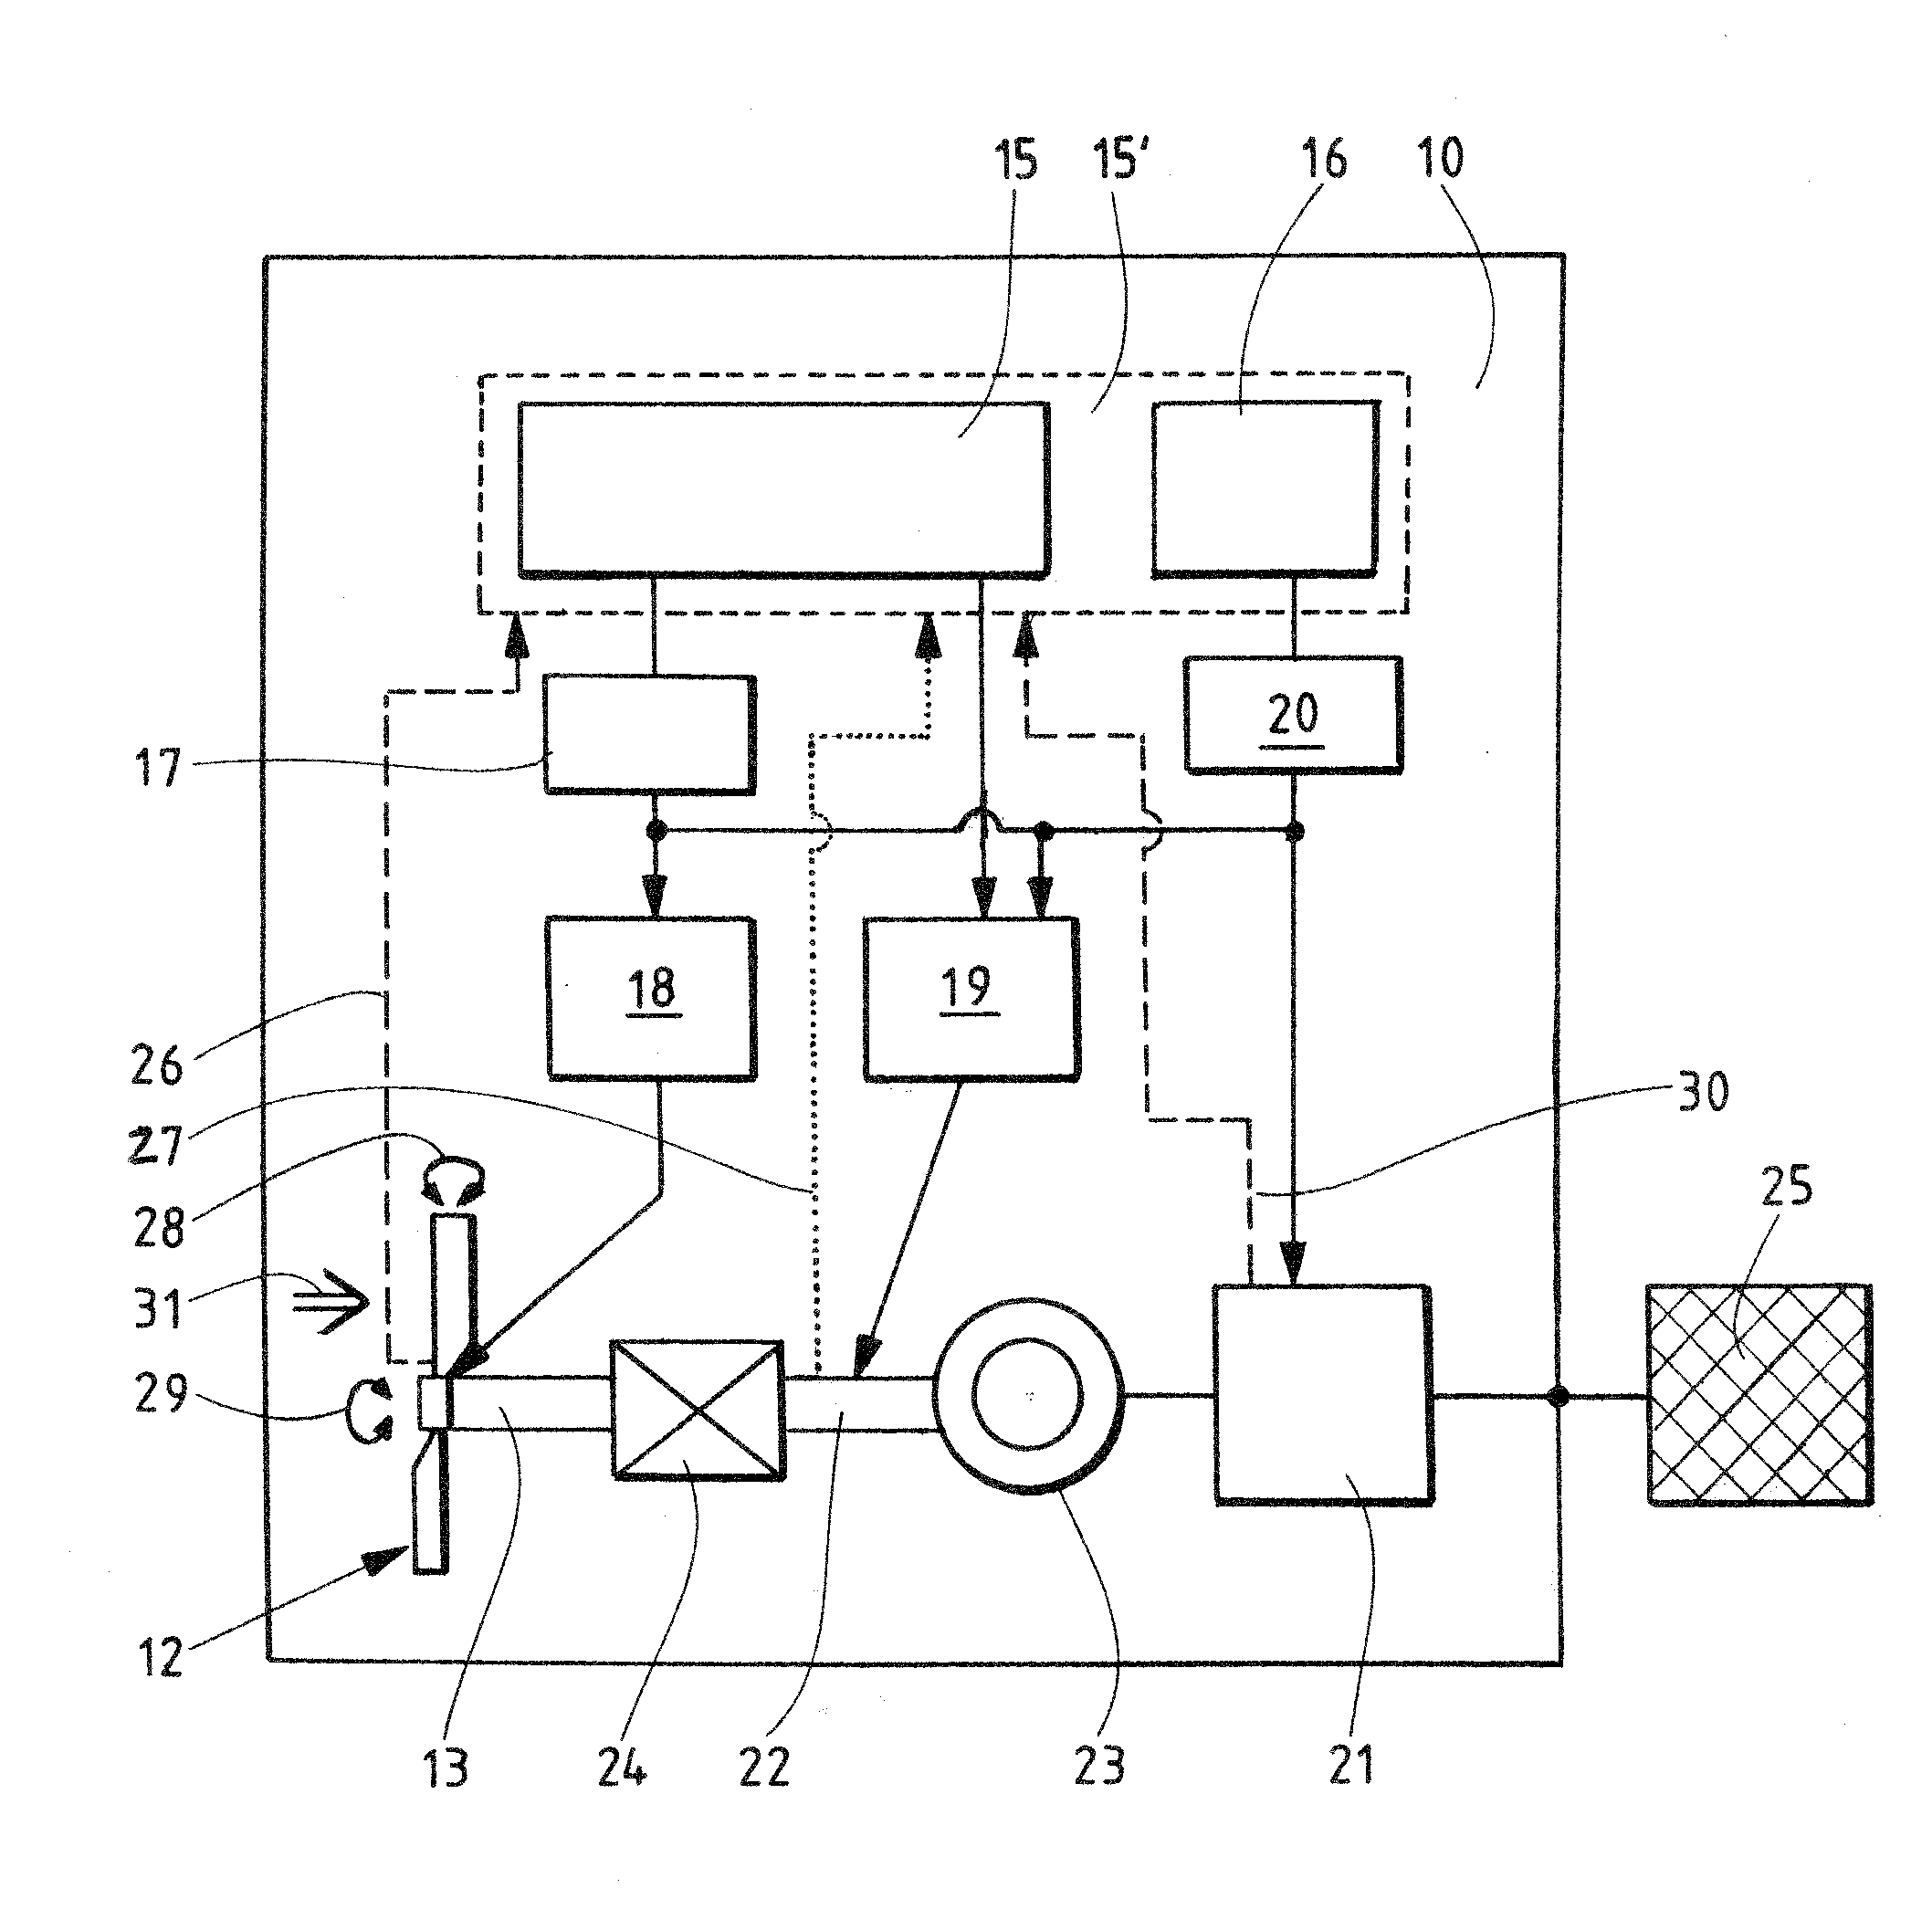 Method for operating a wind energy installation and a wind energy installation